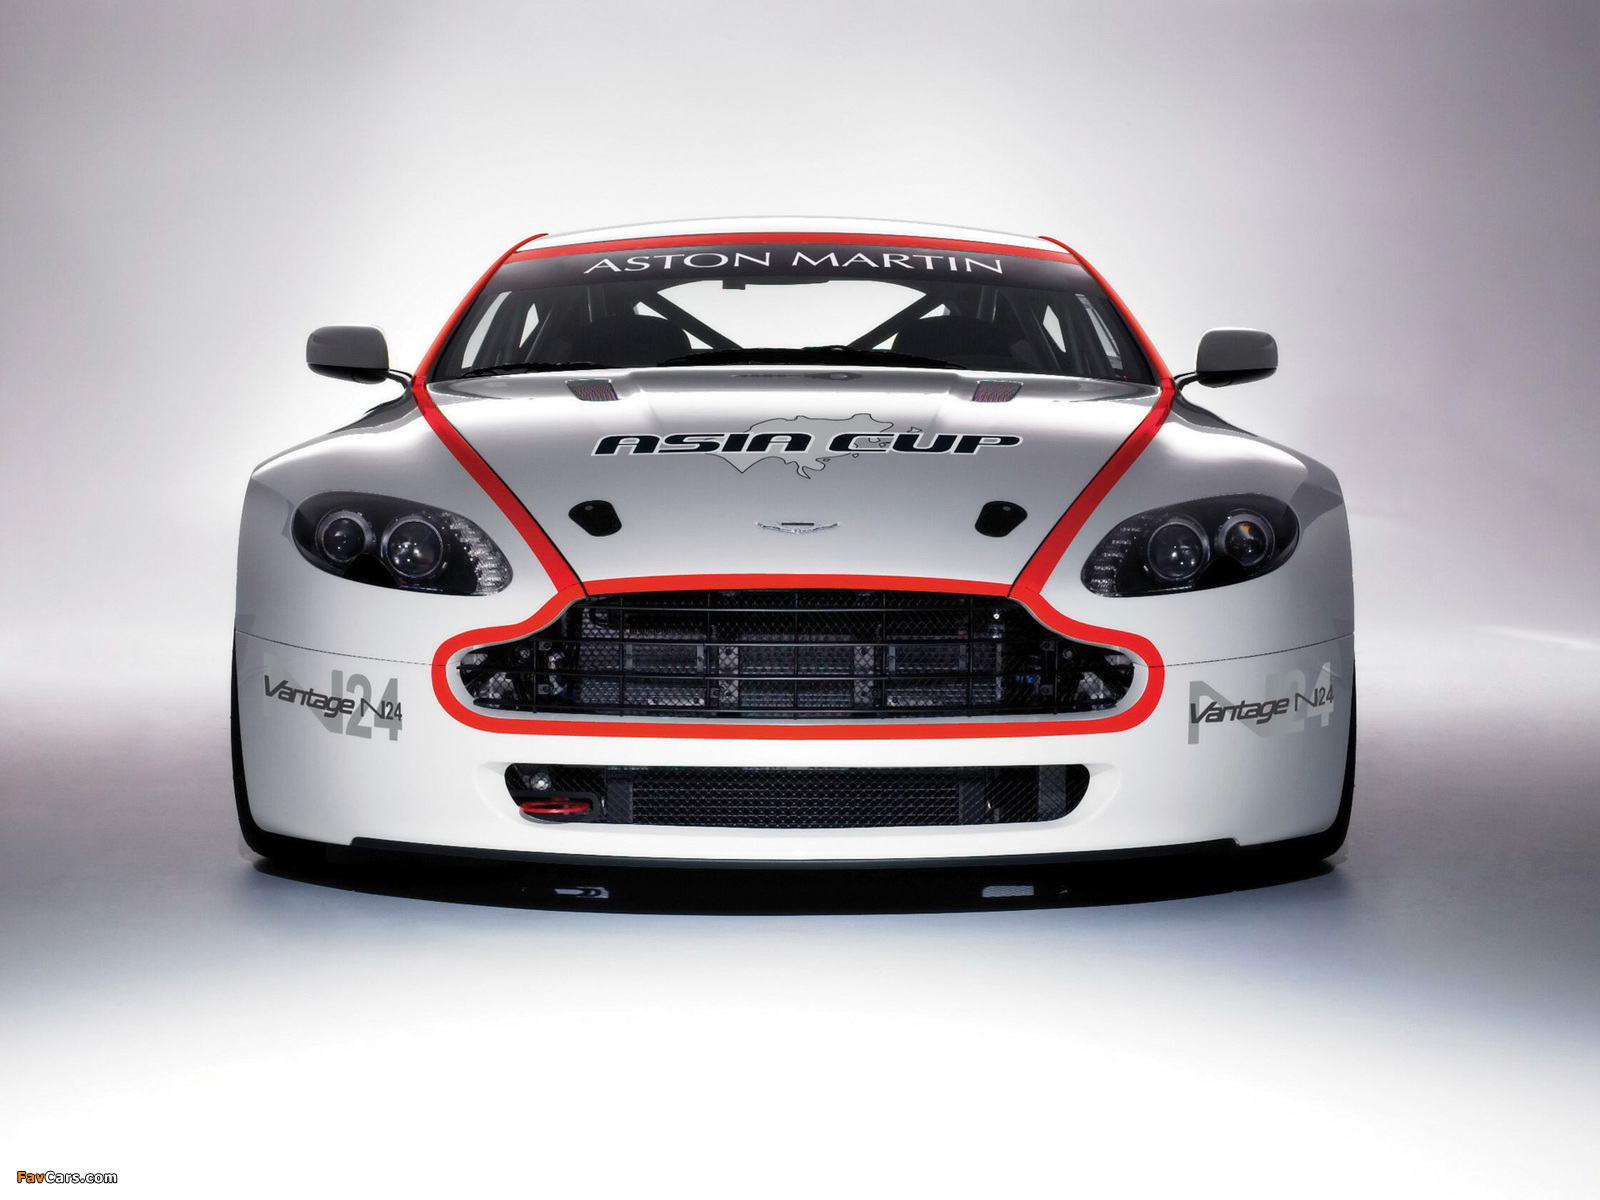 Aston Martin V8 Vantage N24 Asia Cup (2008) wallpapers (1600 x 1200)